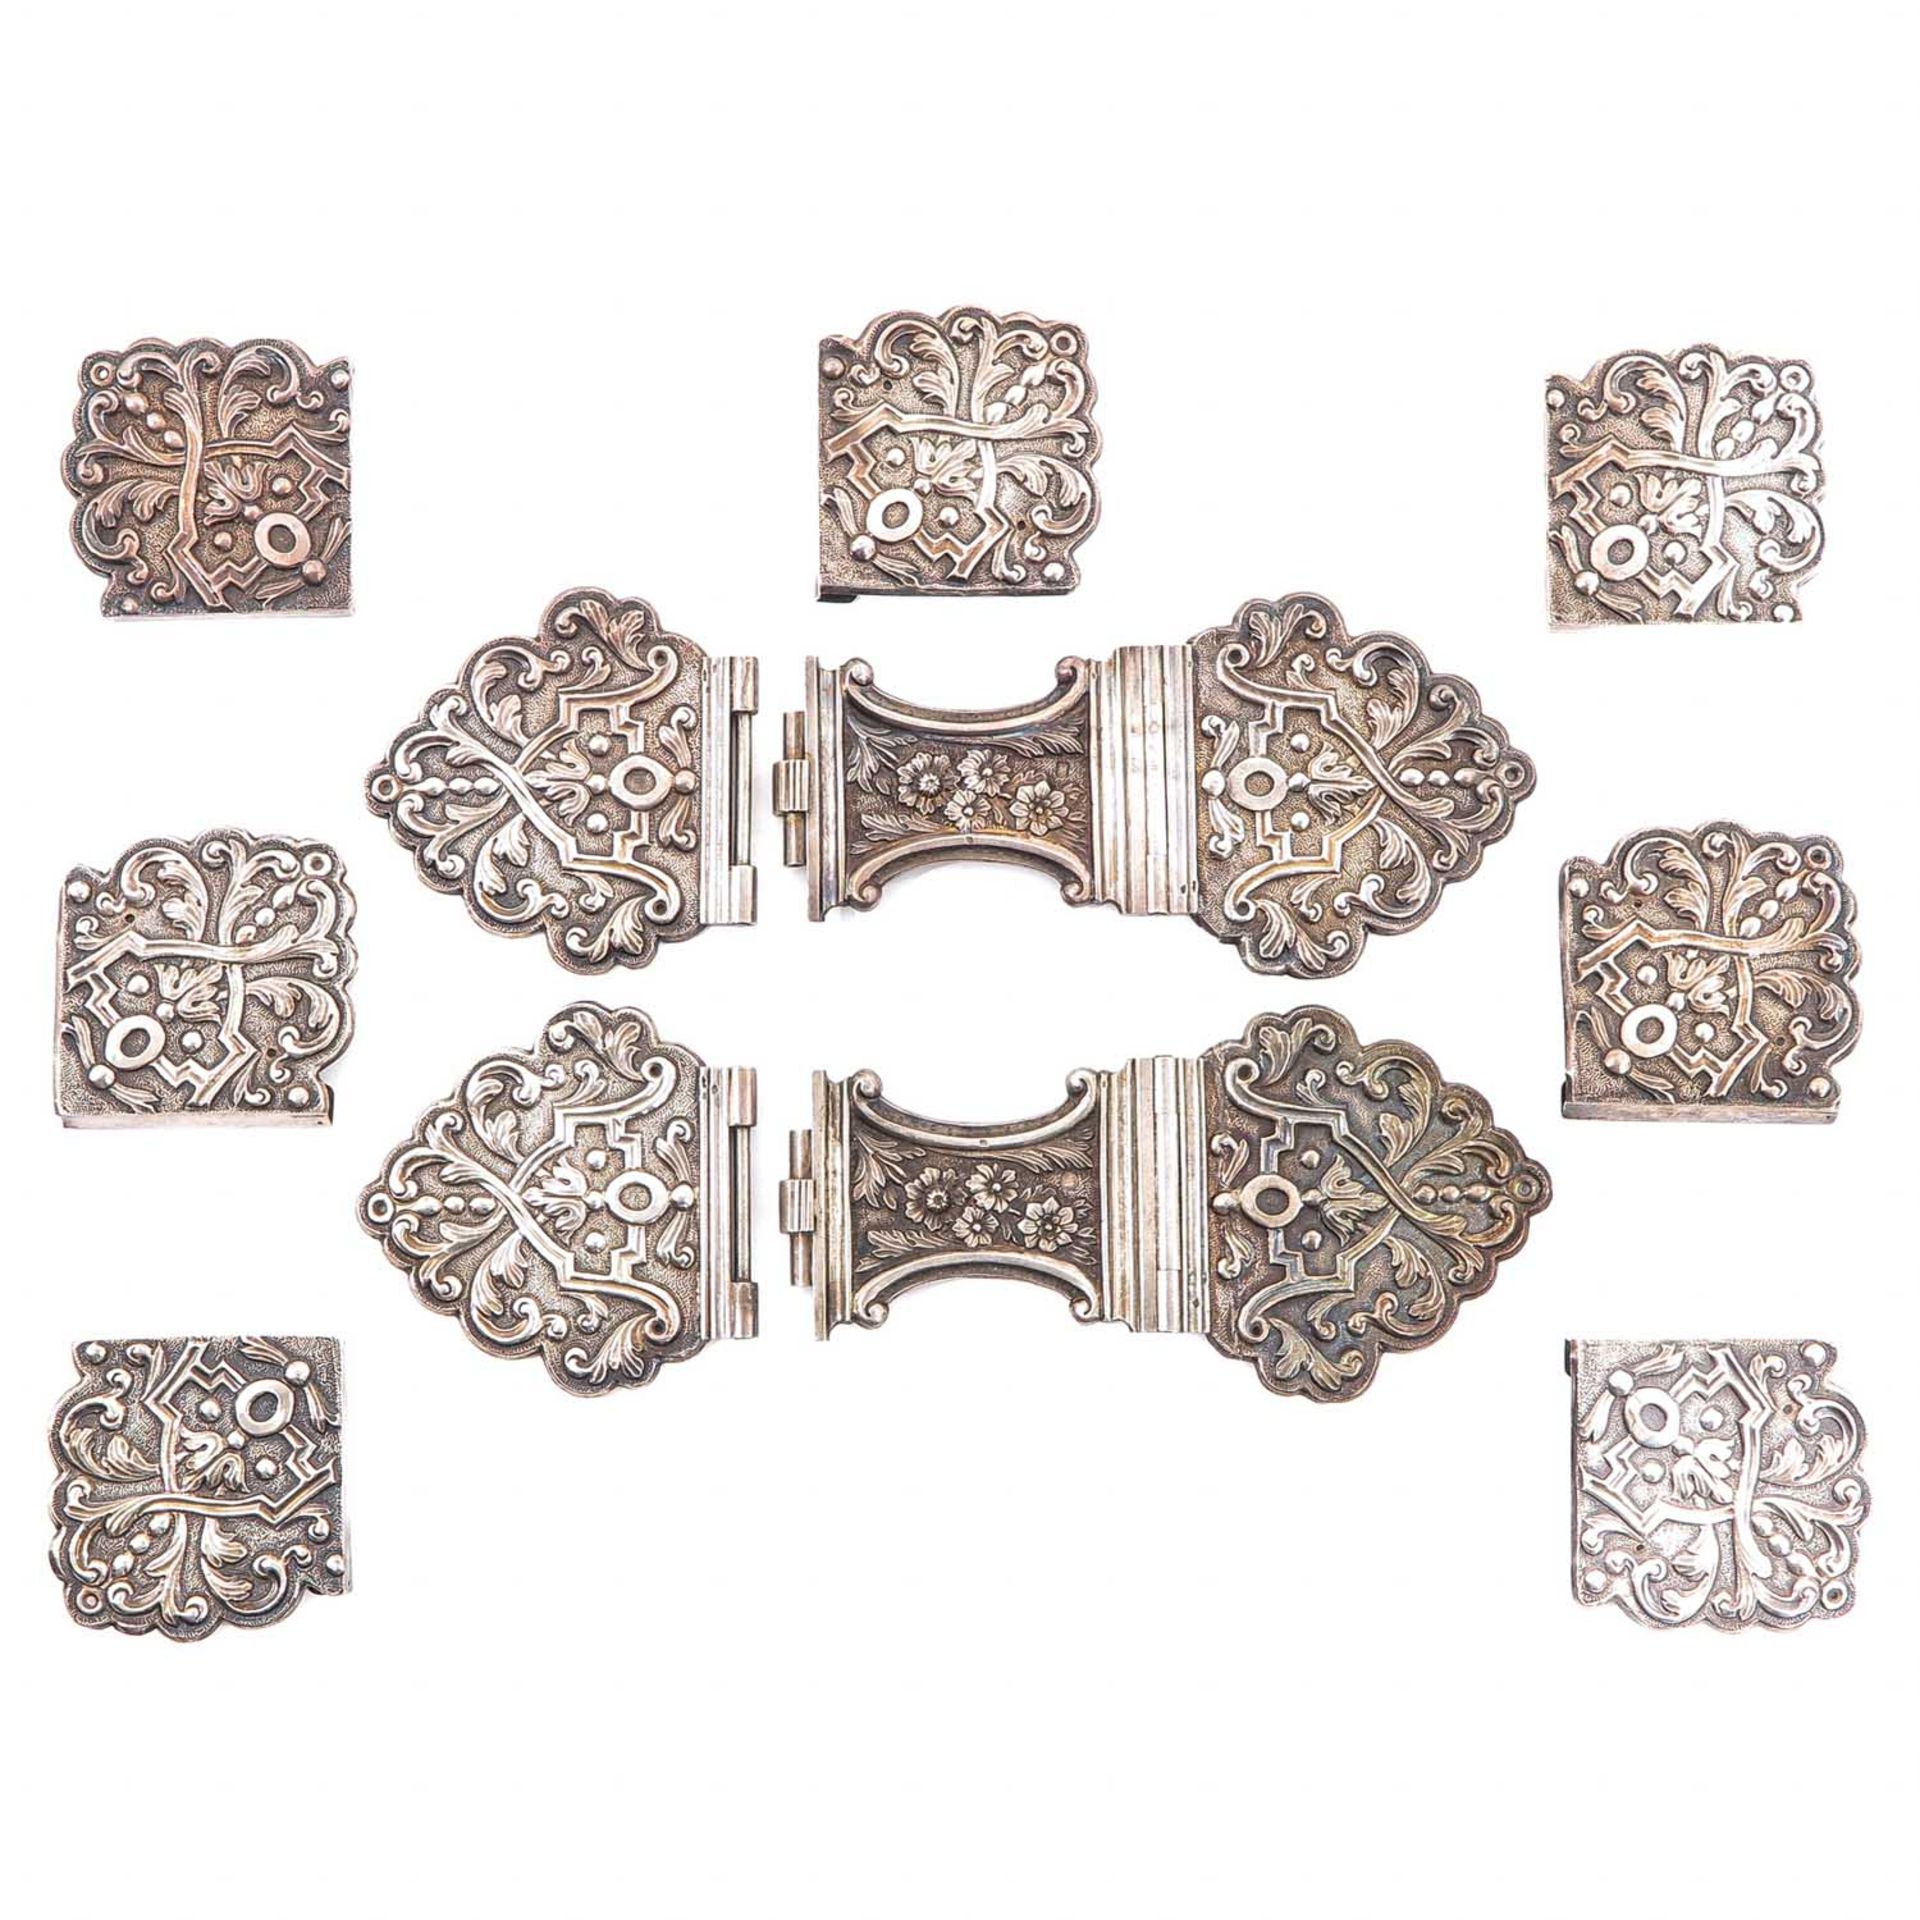 A Collection of 11 Silver Missal Clasp